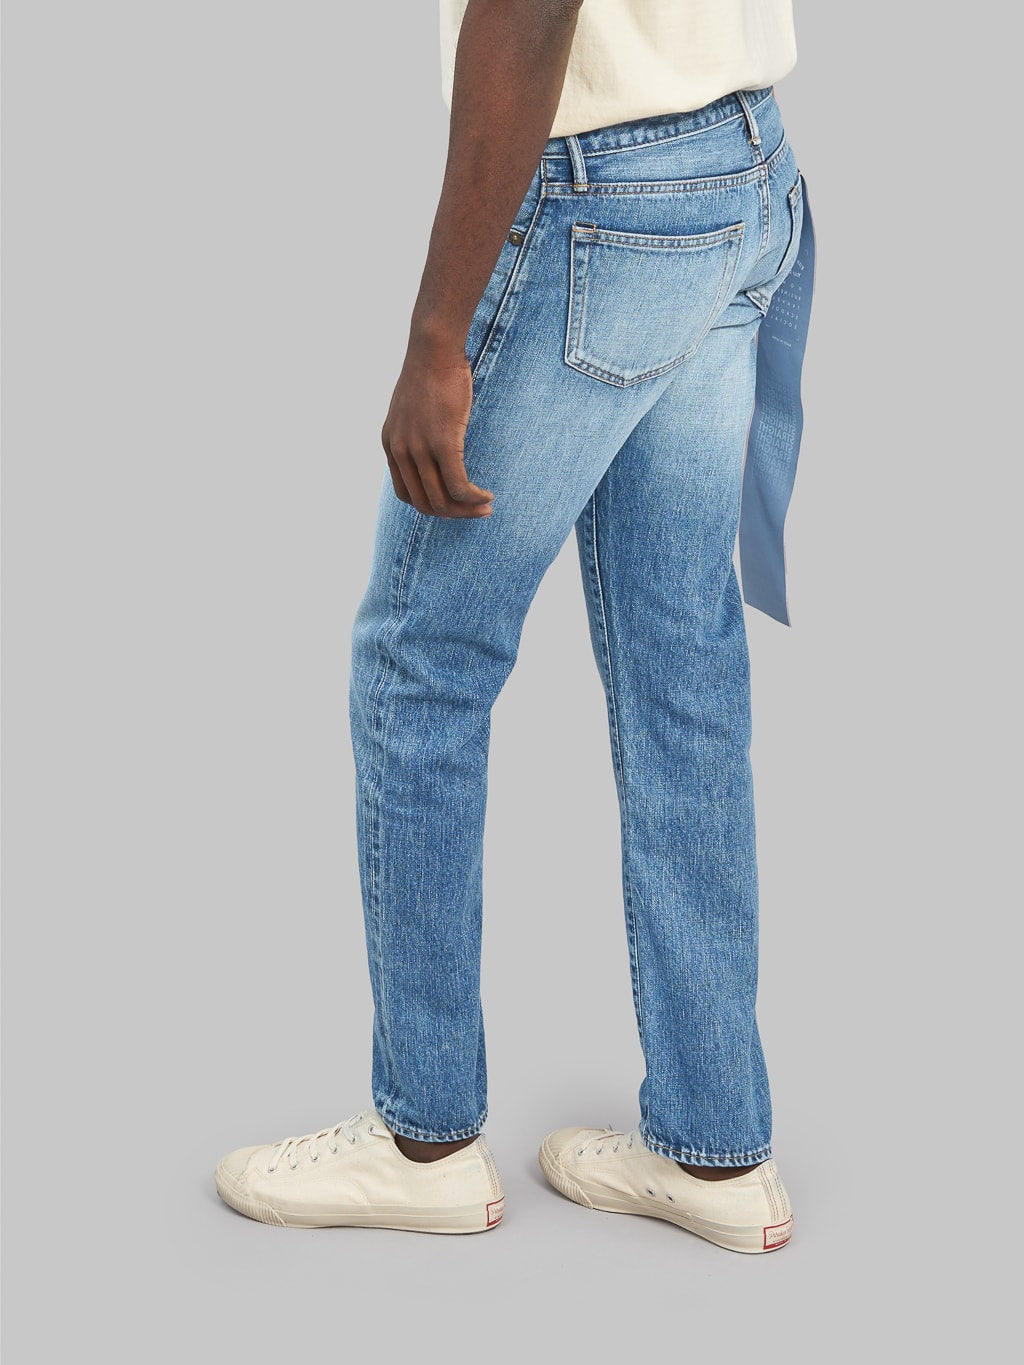 Japan Blue J304 Africa cotton Stonewashed Straight Jeans fitting